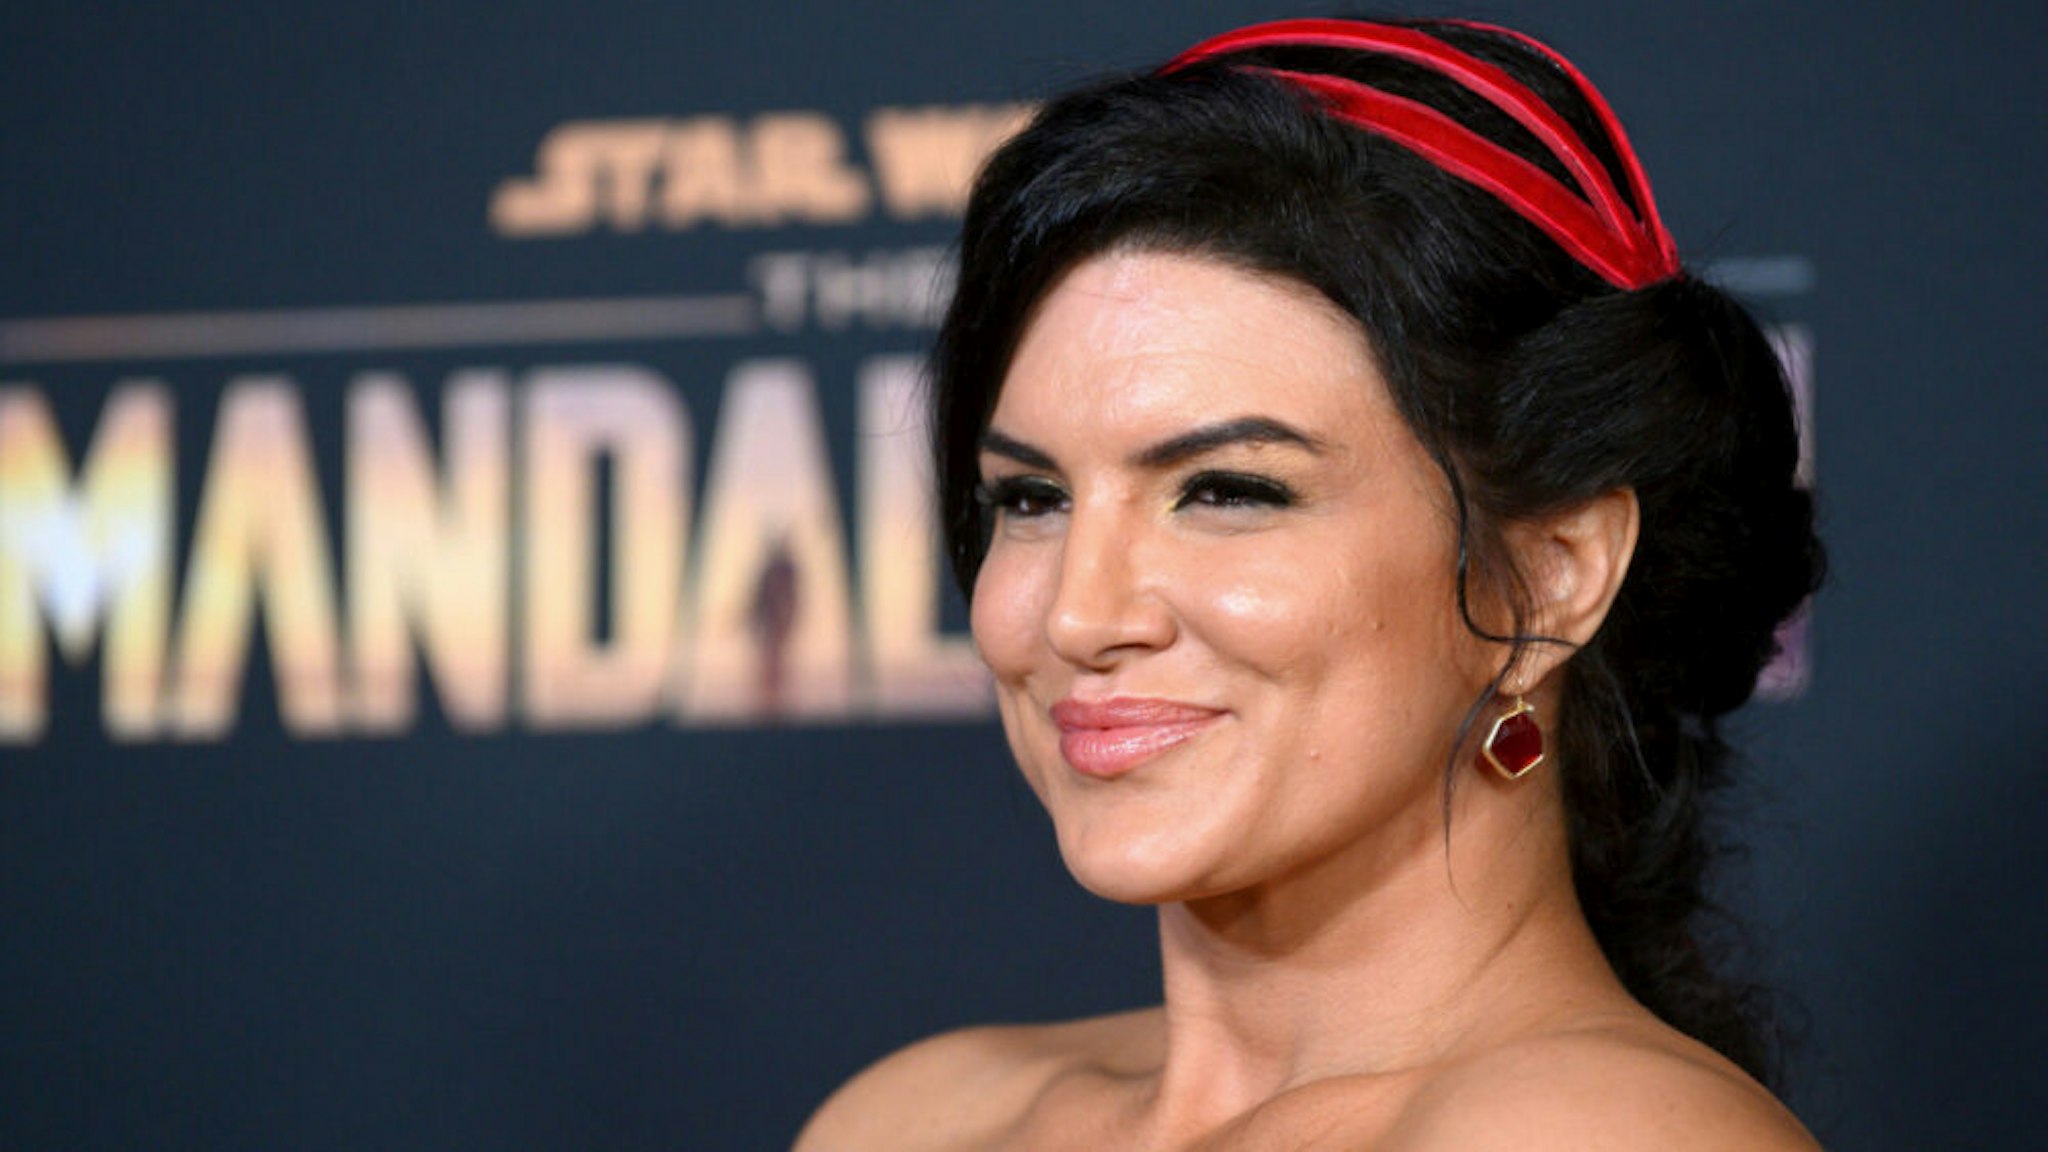 US actress Gina Carano arrives for Disney+ World Premiere of "The Mandalorian" at El Capitan theatre in Hollywood on November 13, 2019.